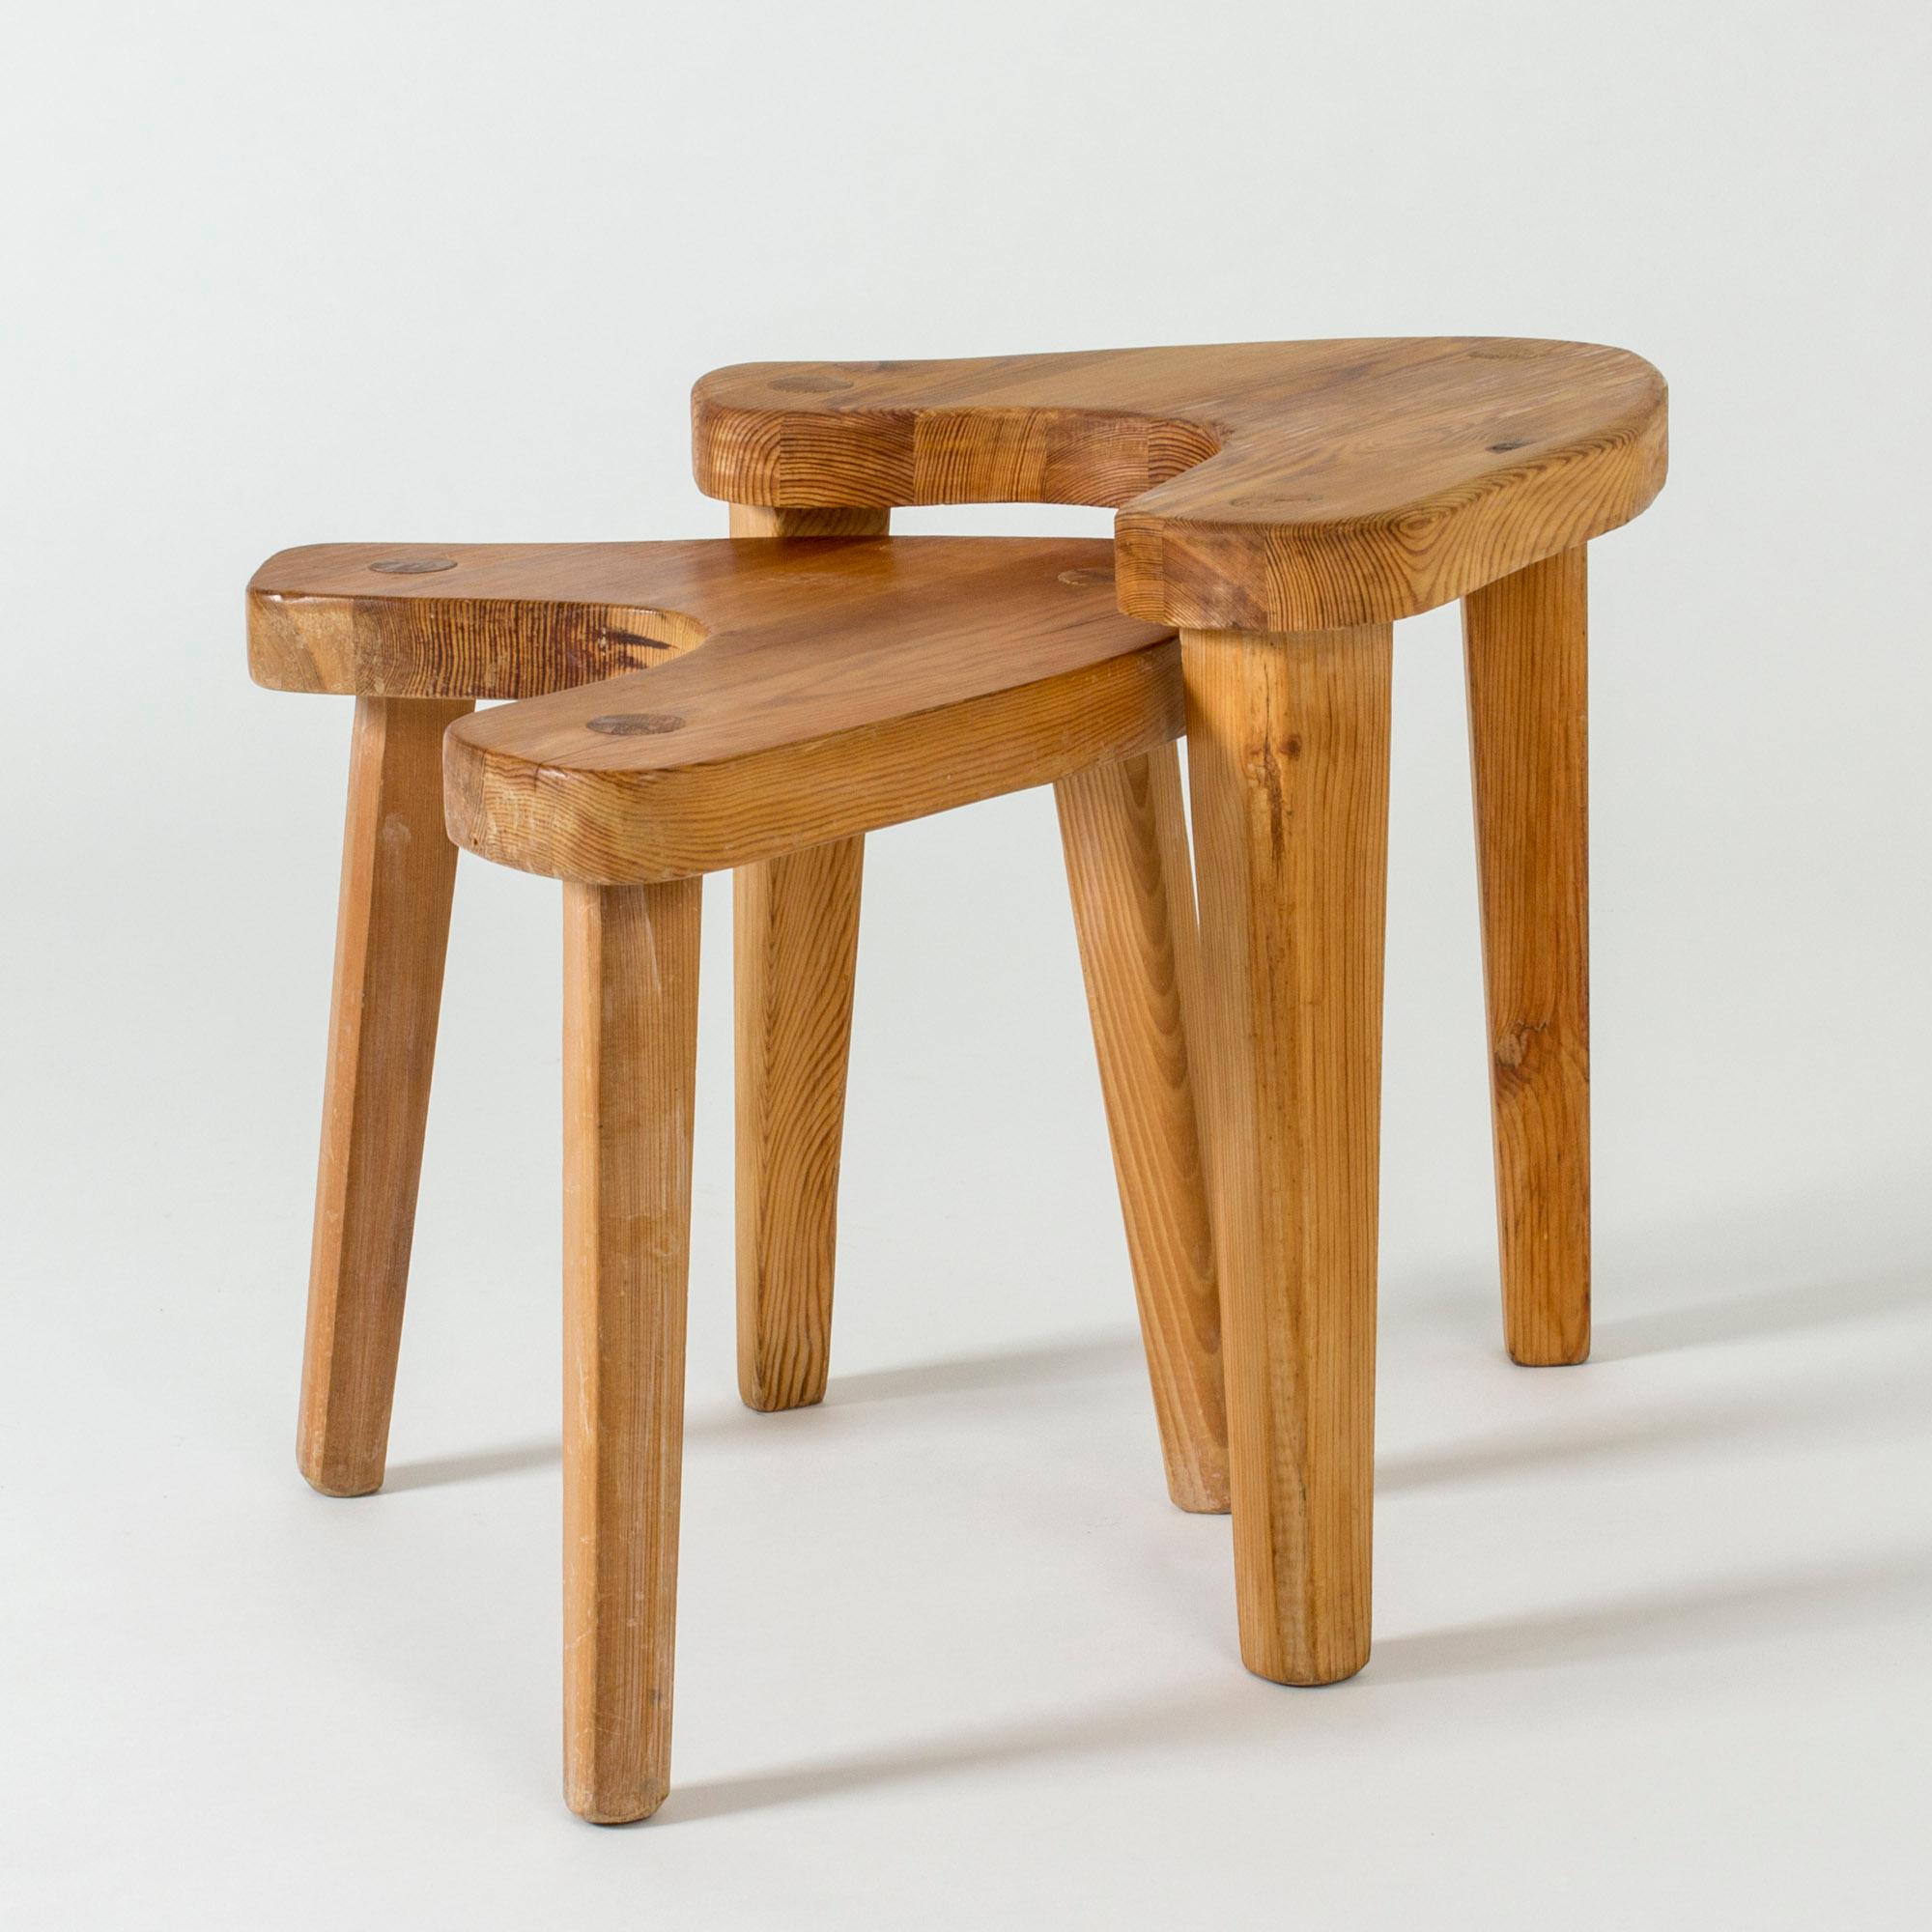 Pair of cool midcentury stools, made from pine. Rustic U-shaped design with accentuated joinery. The stools are different heights and fit into each other perfectly.

Measures: Large stool: Height 44 cm, width 48 cm, depth 45 cm
Smaller stool: